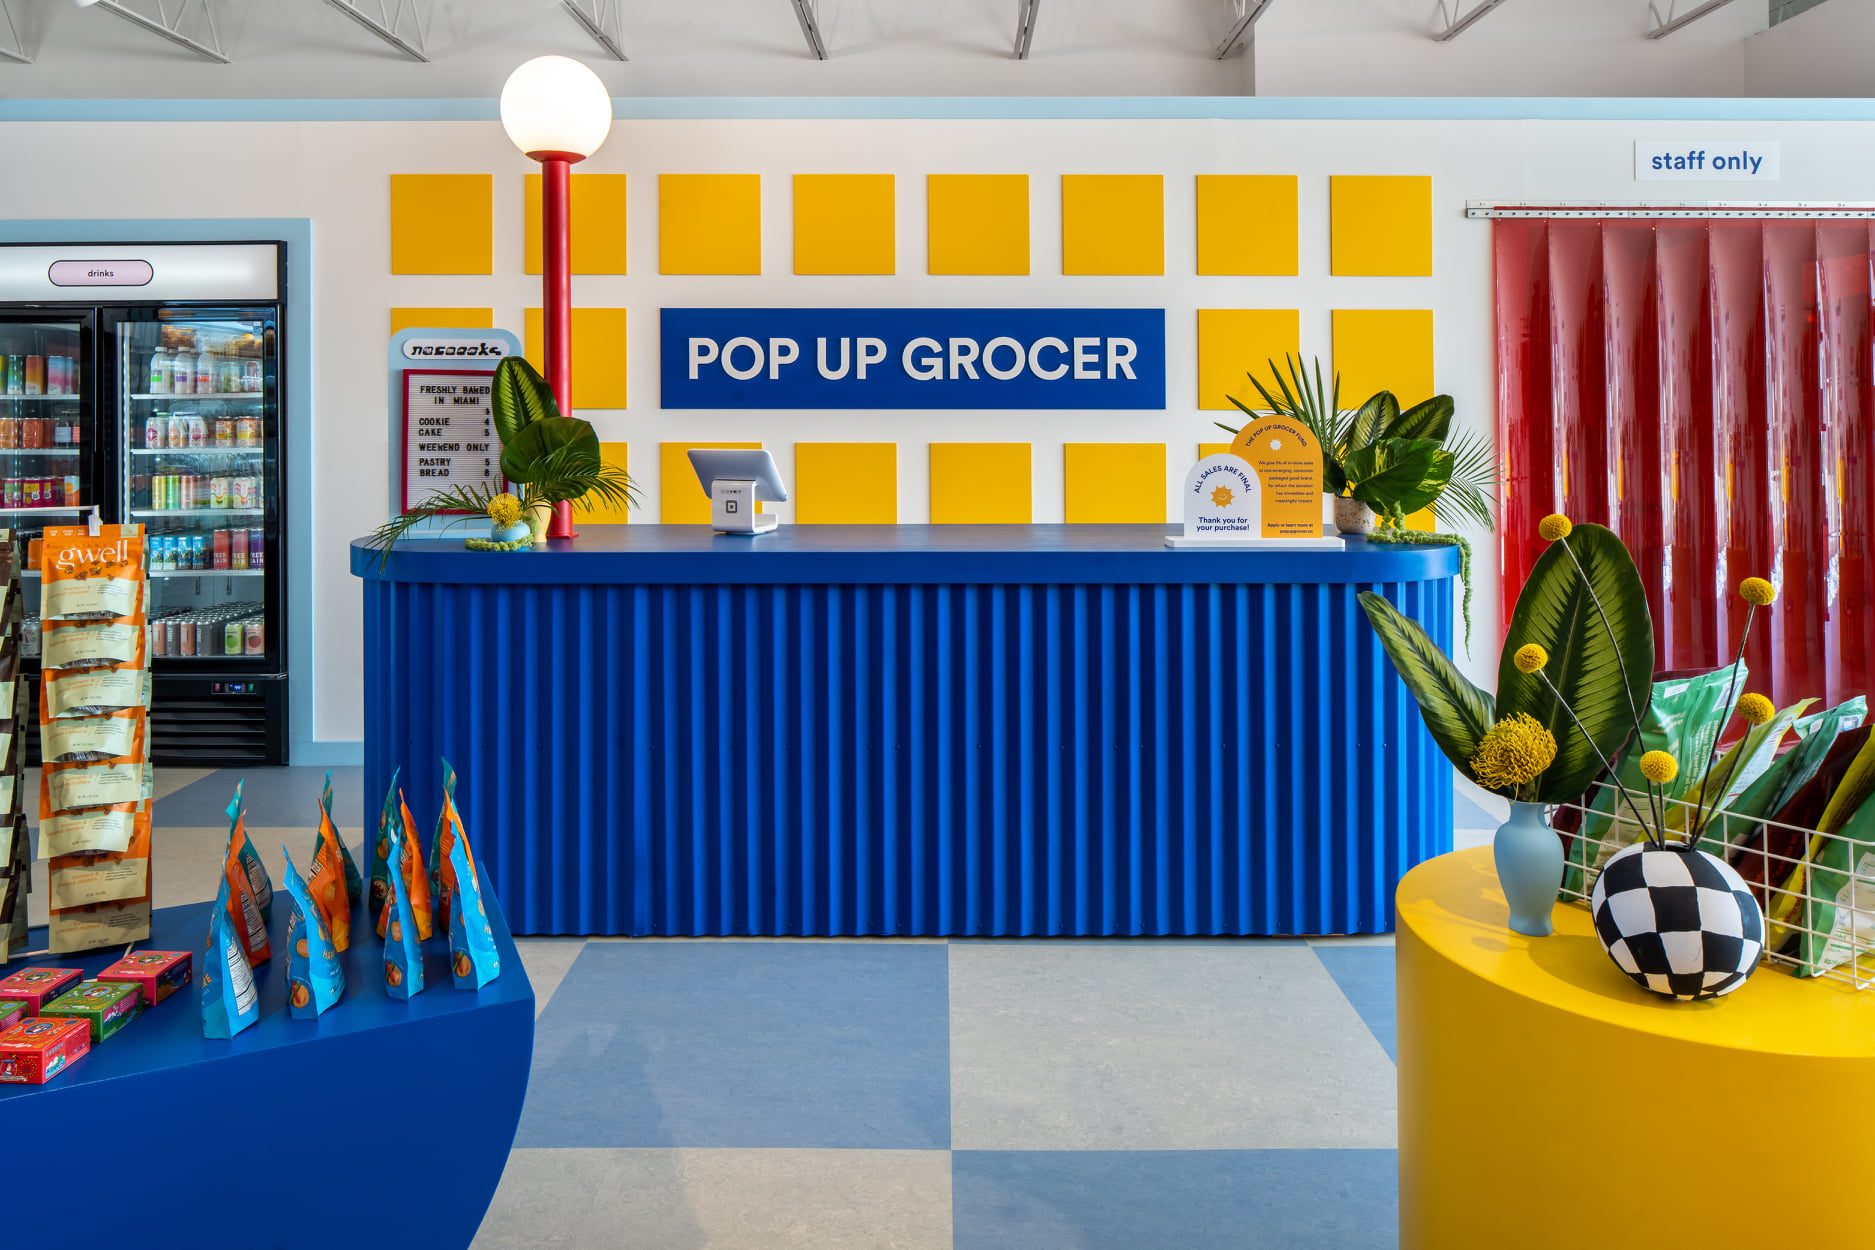 Pop Up Grocer's strategy: 'Product discovery' vs. weekly haul